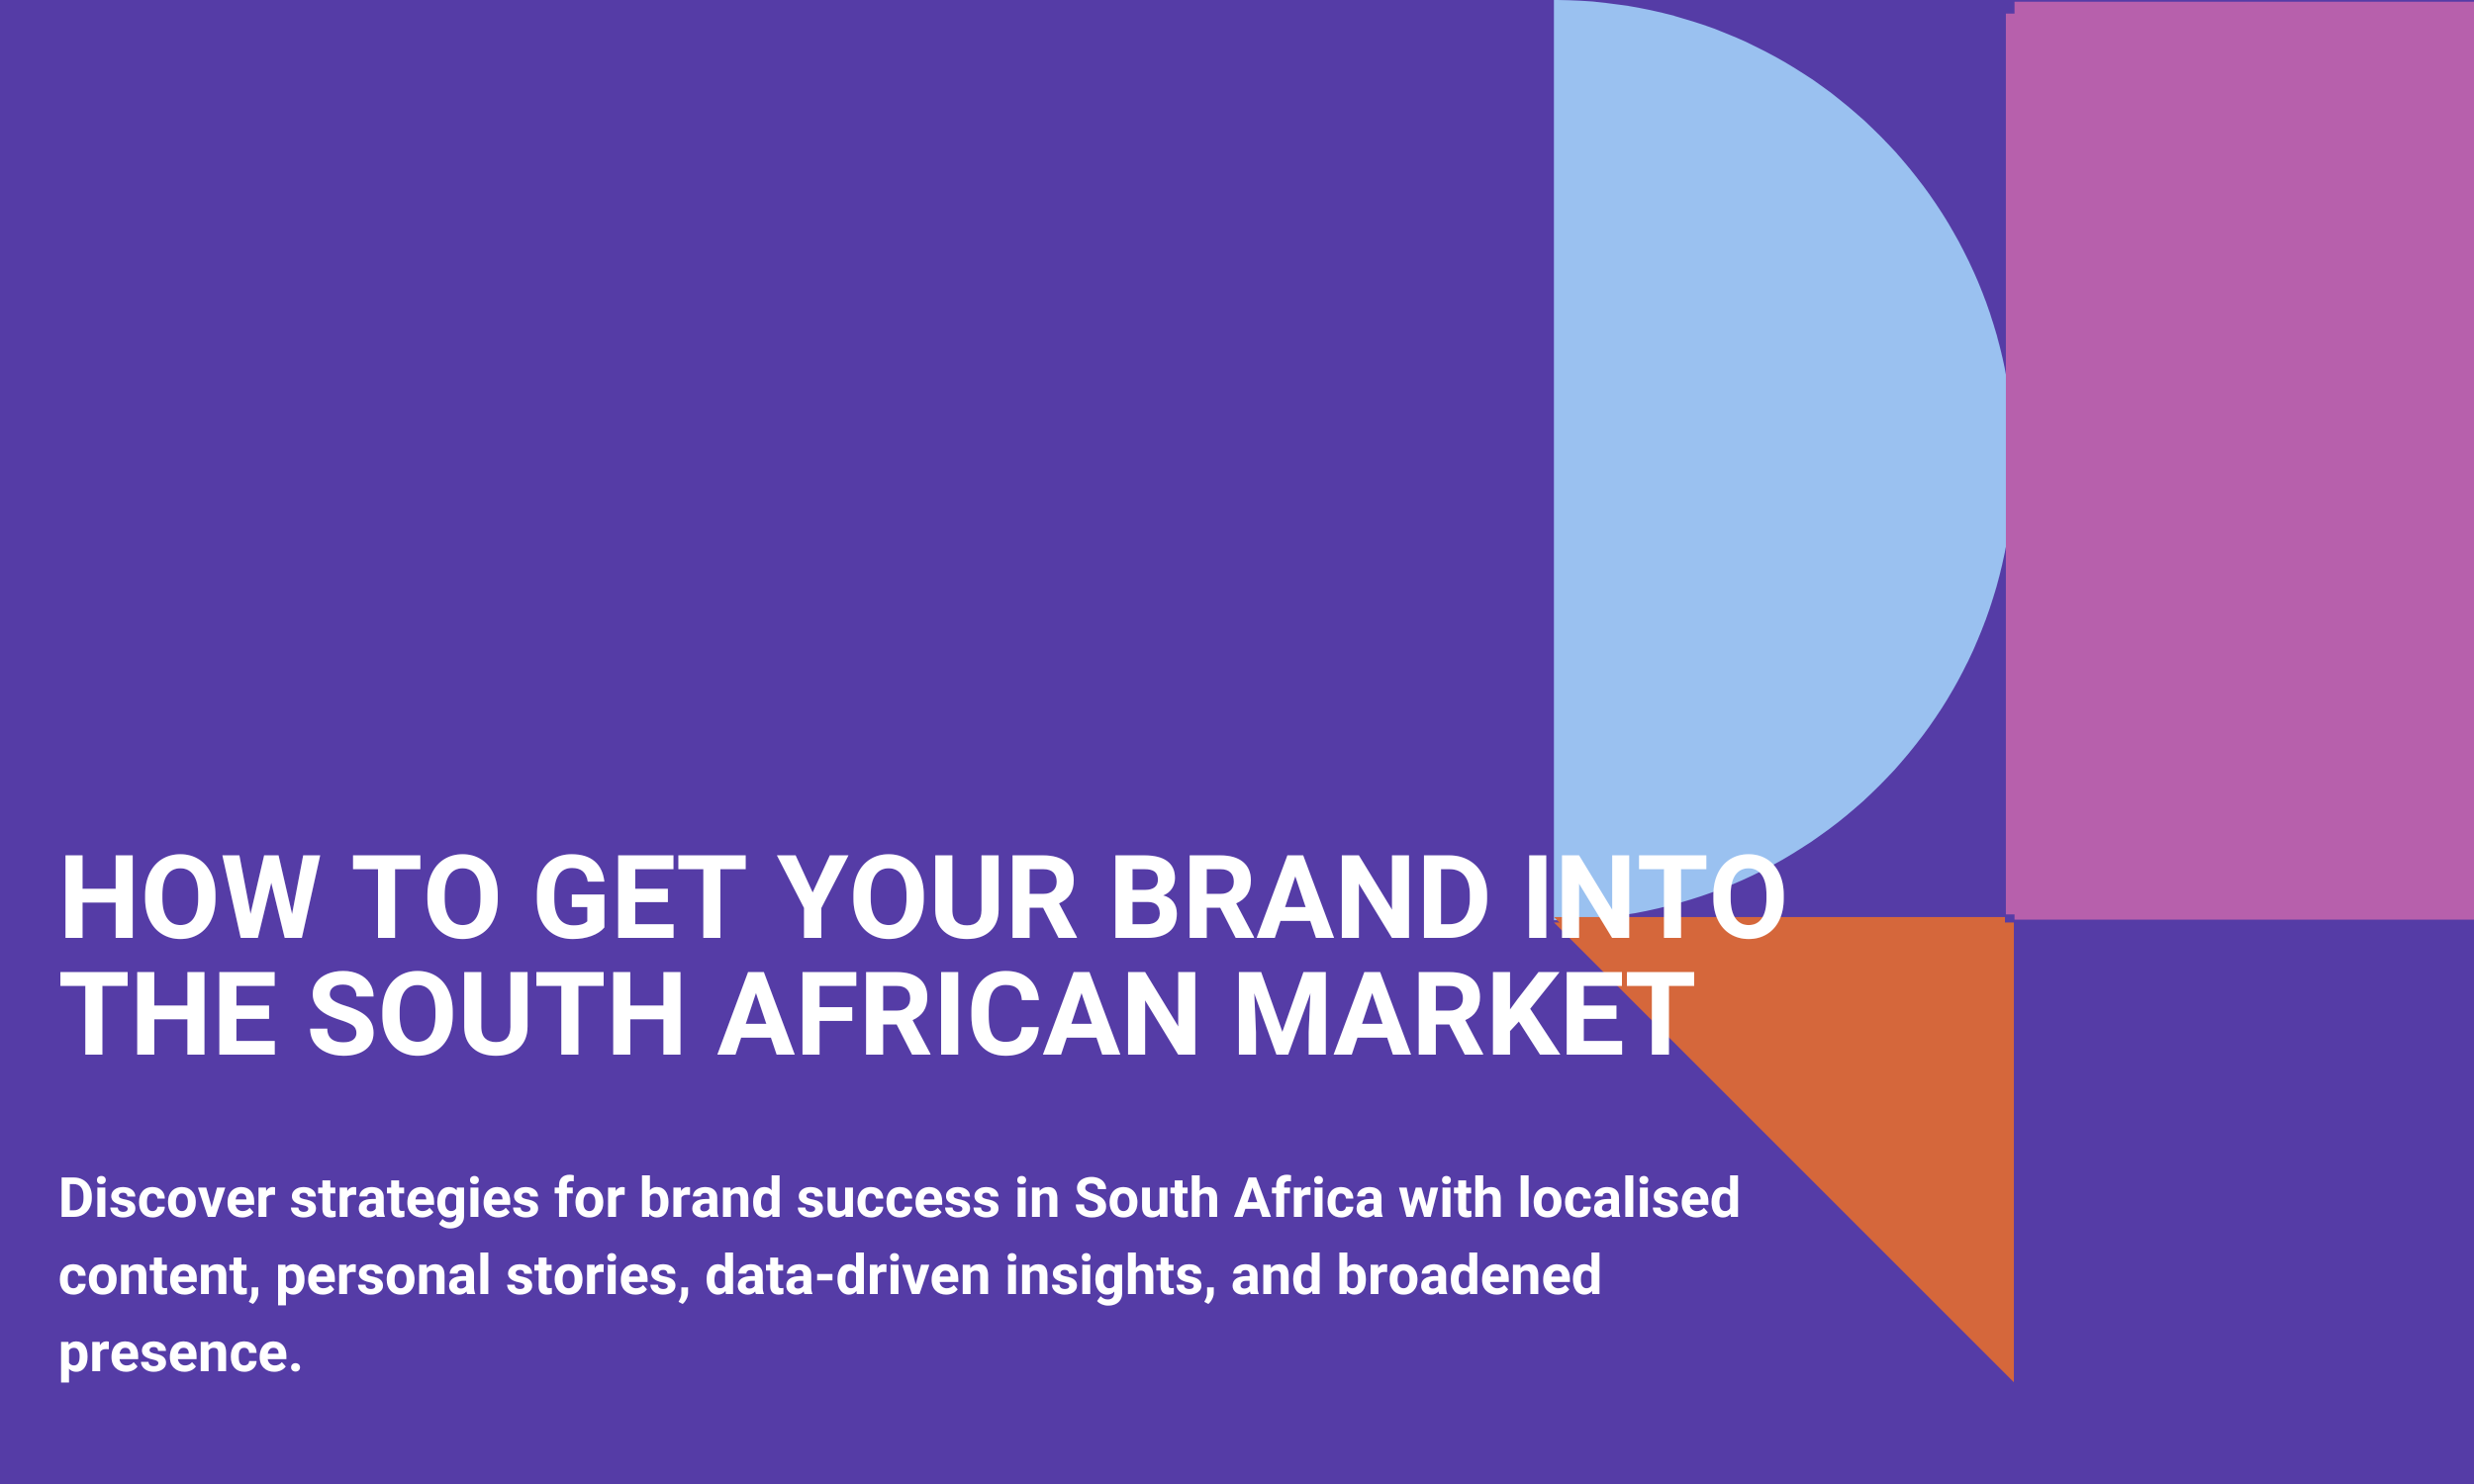 How To Get Your Brand Into The South African Market